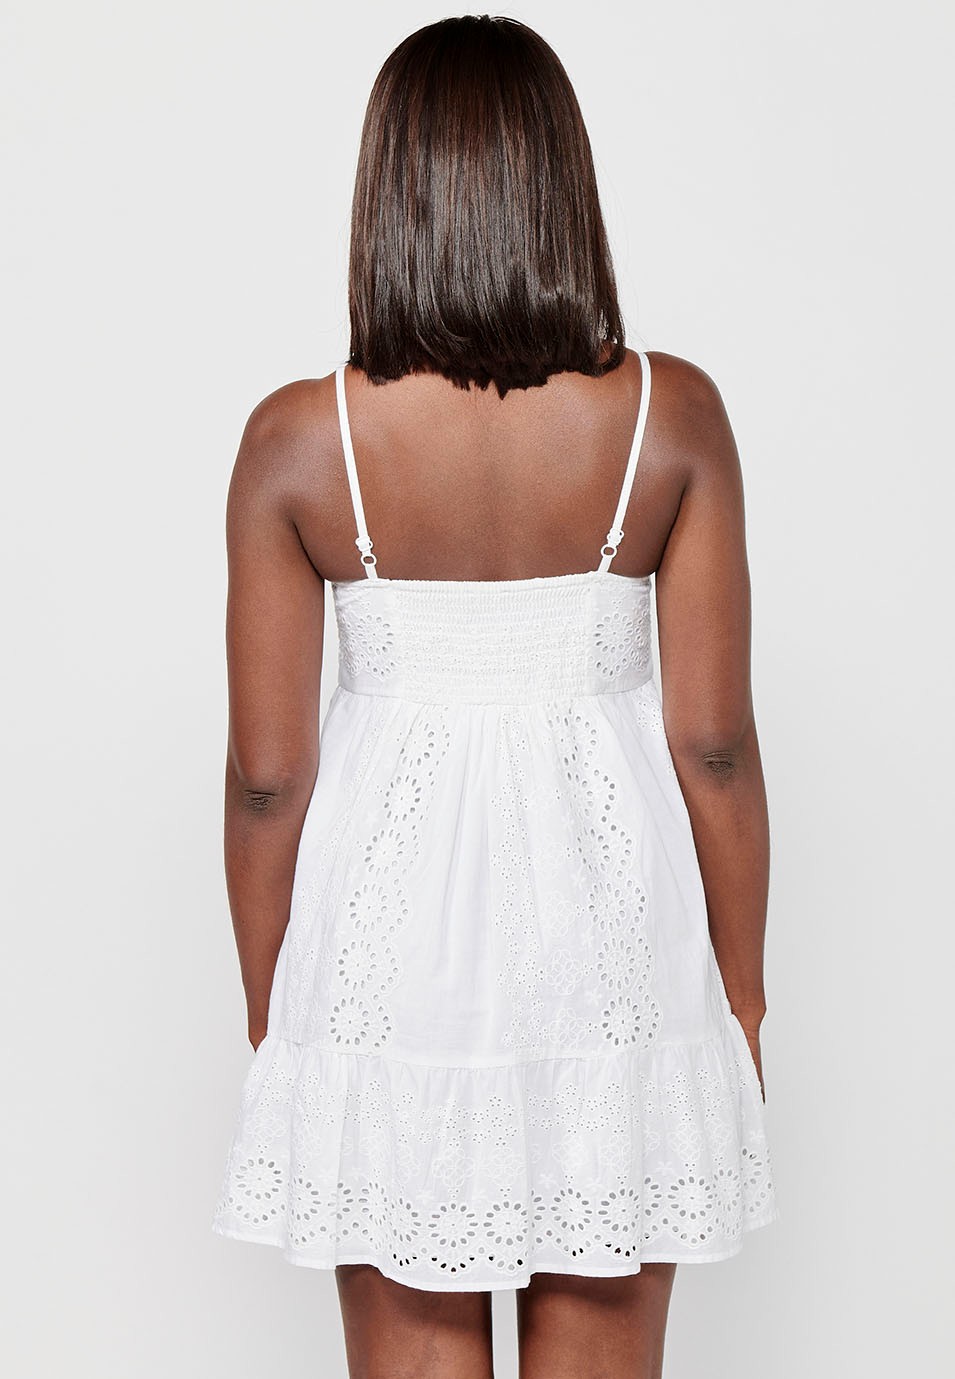 Strap dress, V-neck, embroidered fabric, white color for women